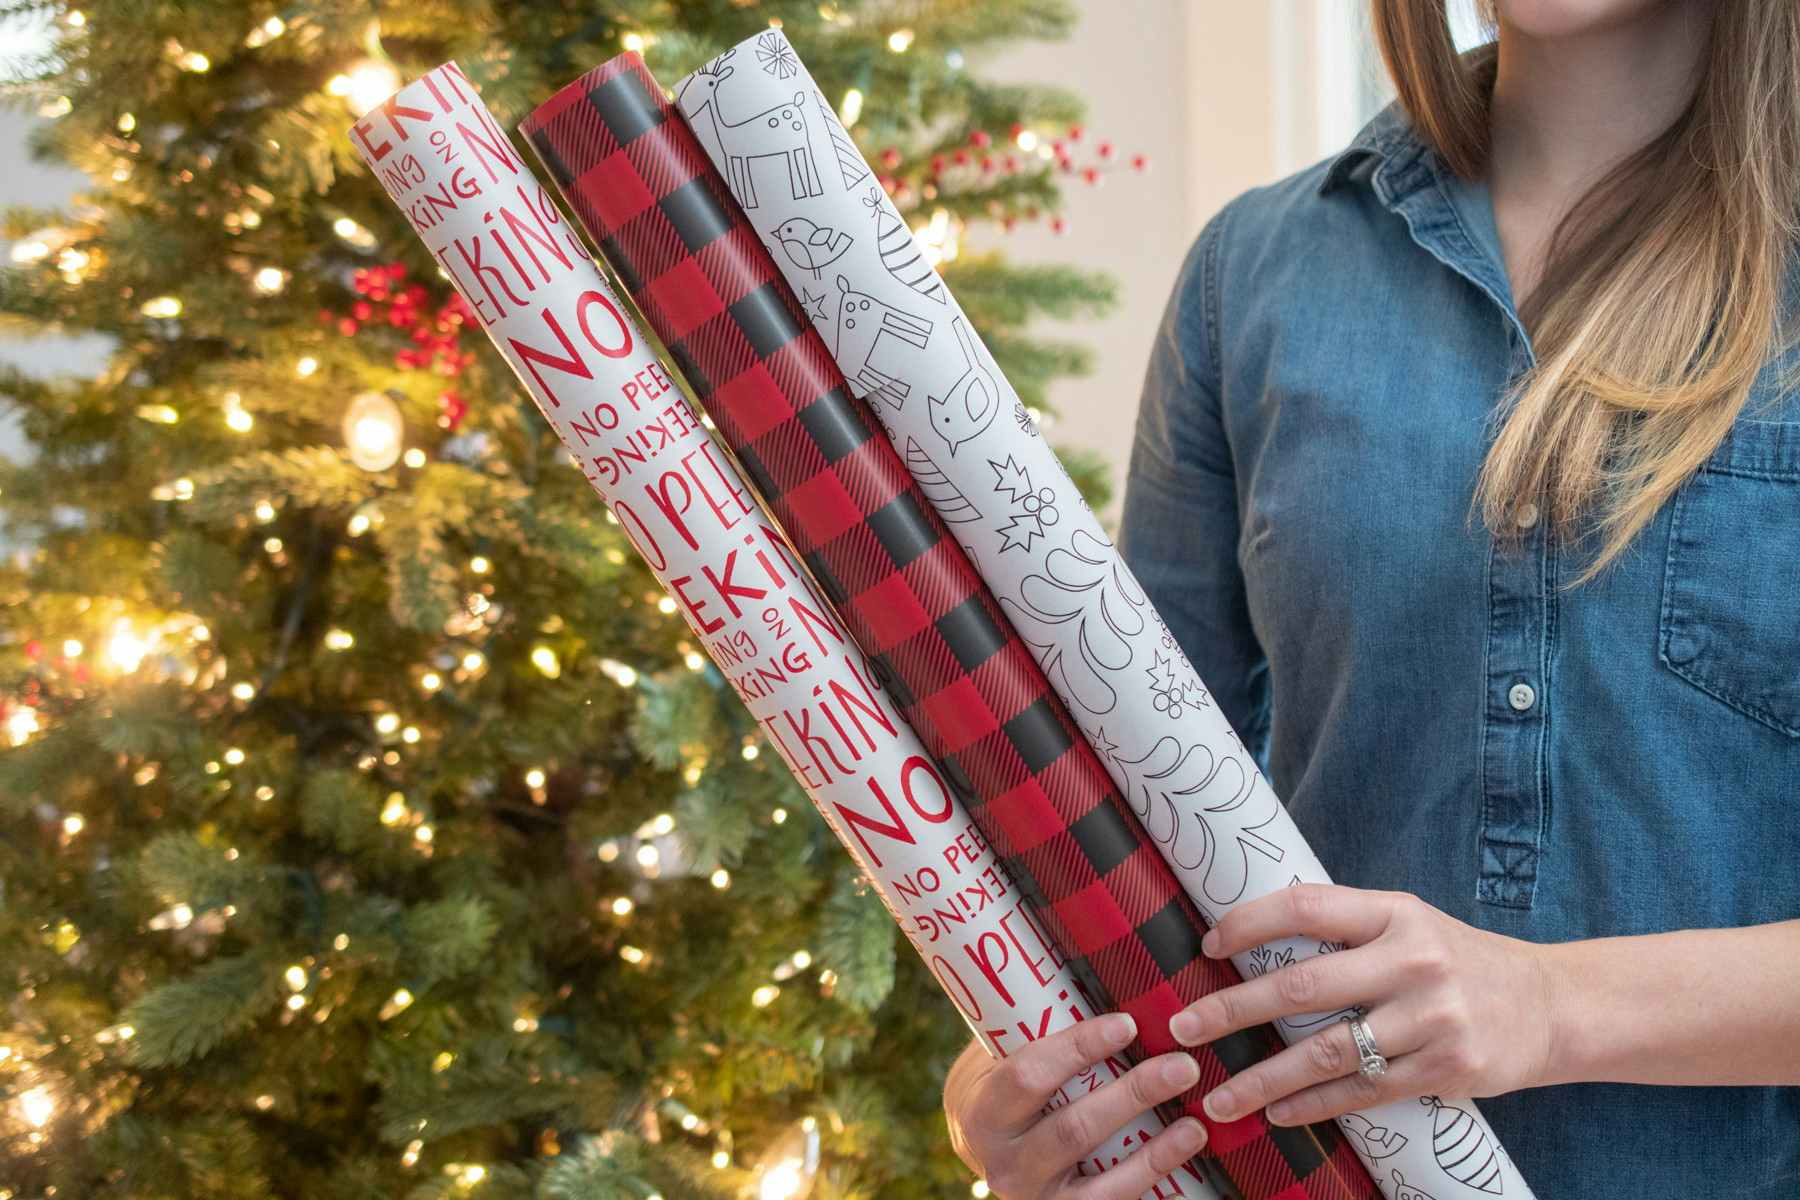 A person holding up three rolls of wrapping paper in front of a Christmas tree